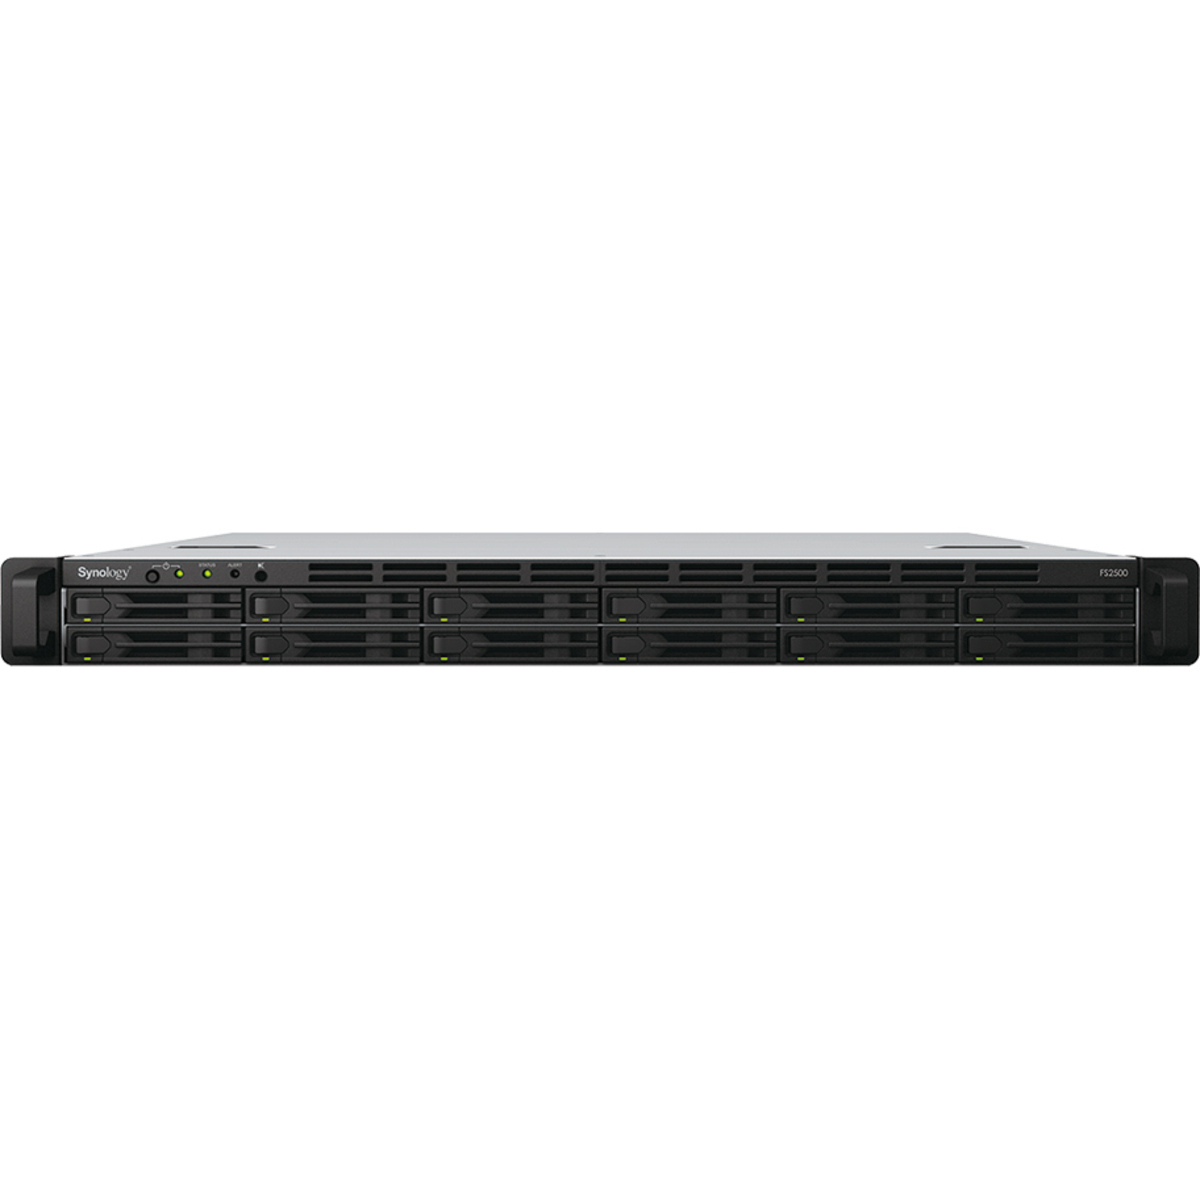 Synology FlashStation FS2500 63tb 12-Bay RackMount Large Business / Enterprise NAS - Network Attached Storage Device 9x7tb Synology SAT5210 Series SAT5210-7000G 2.5 530/500MB/s SATA 6Gb/s SSD ENTERPRISE Class Drives Installed - Burn-In Tested - FREE RAM UPGRADE FlashStation FS2500